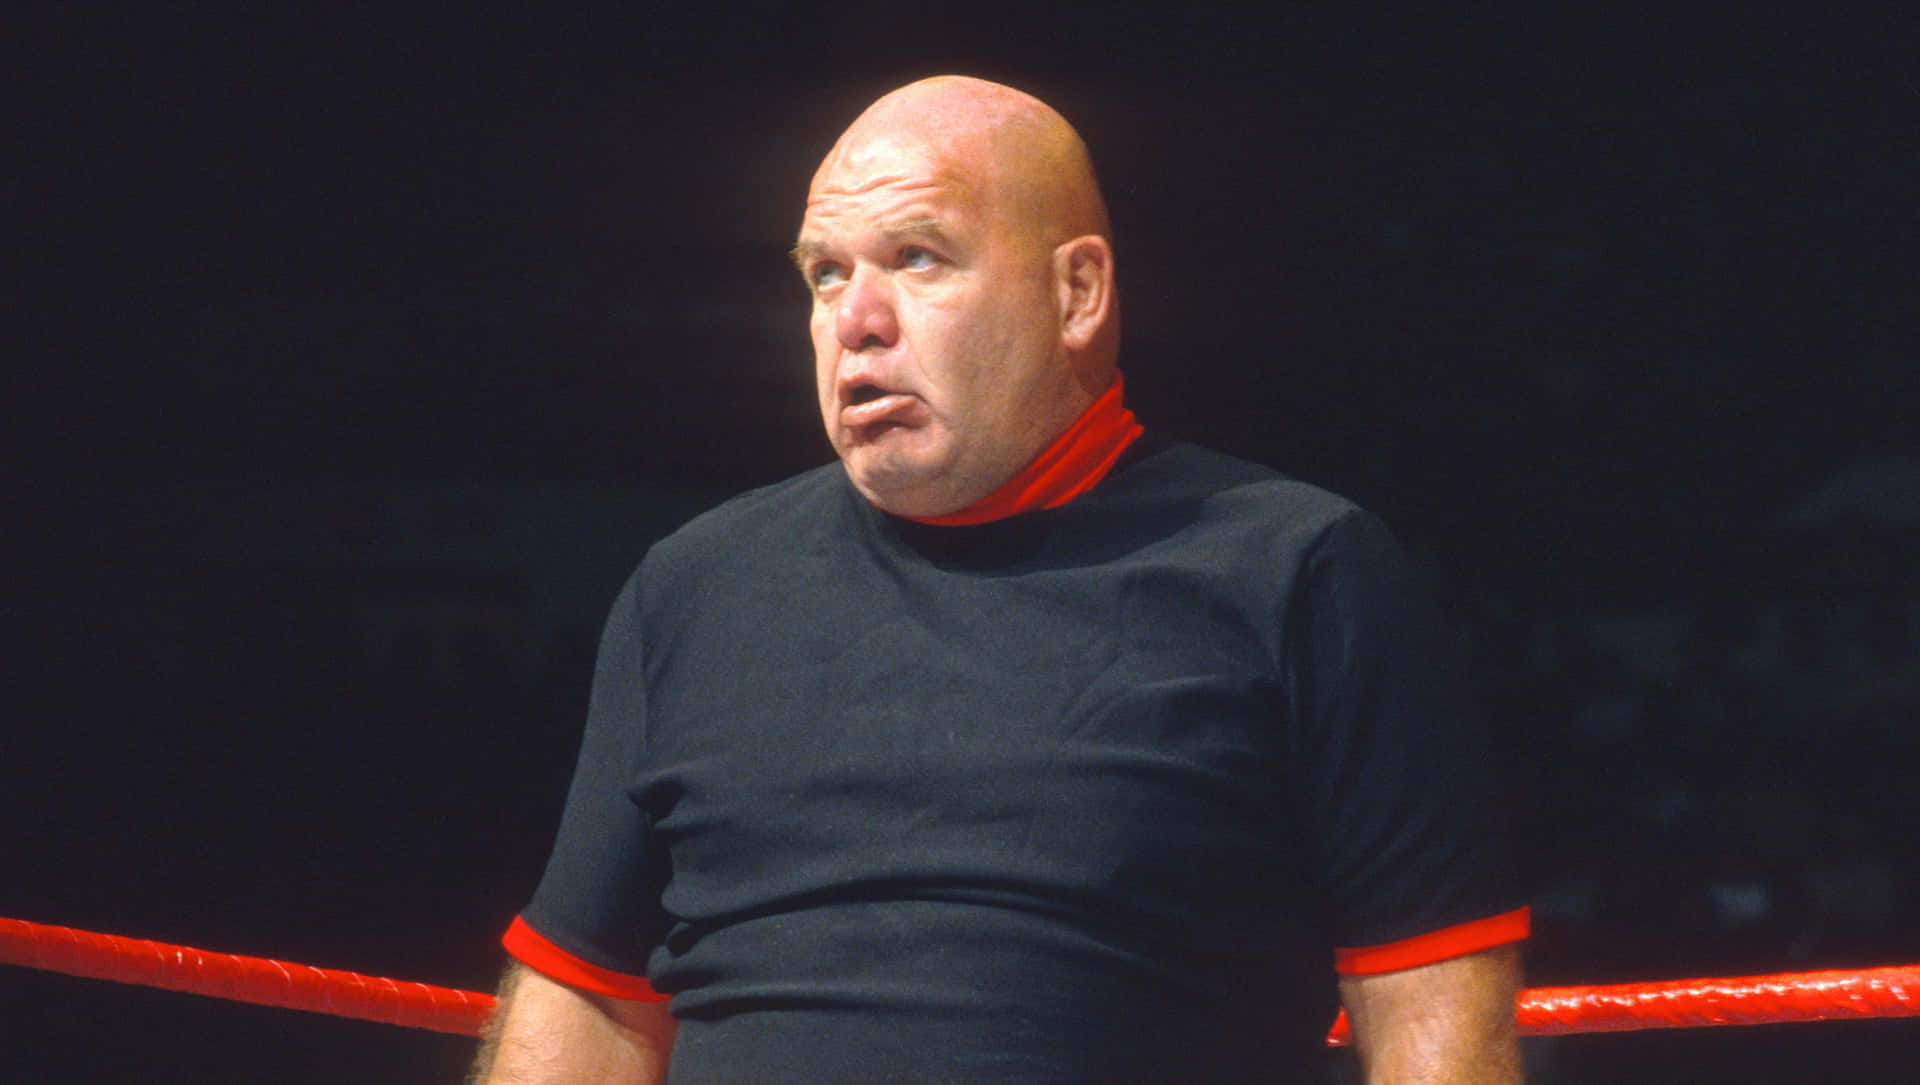 George Steele - An Era of Wrestling Passion. Wallpaper